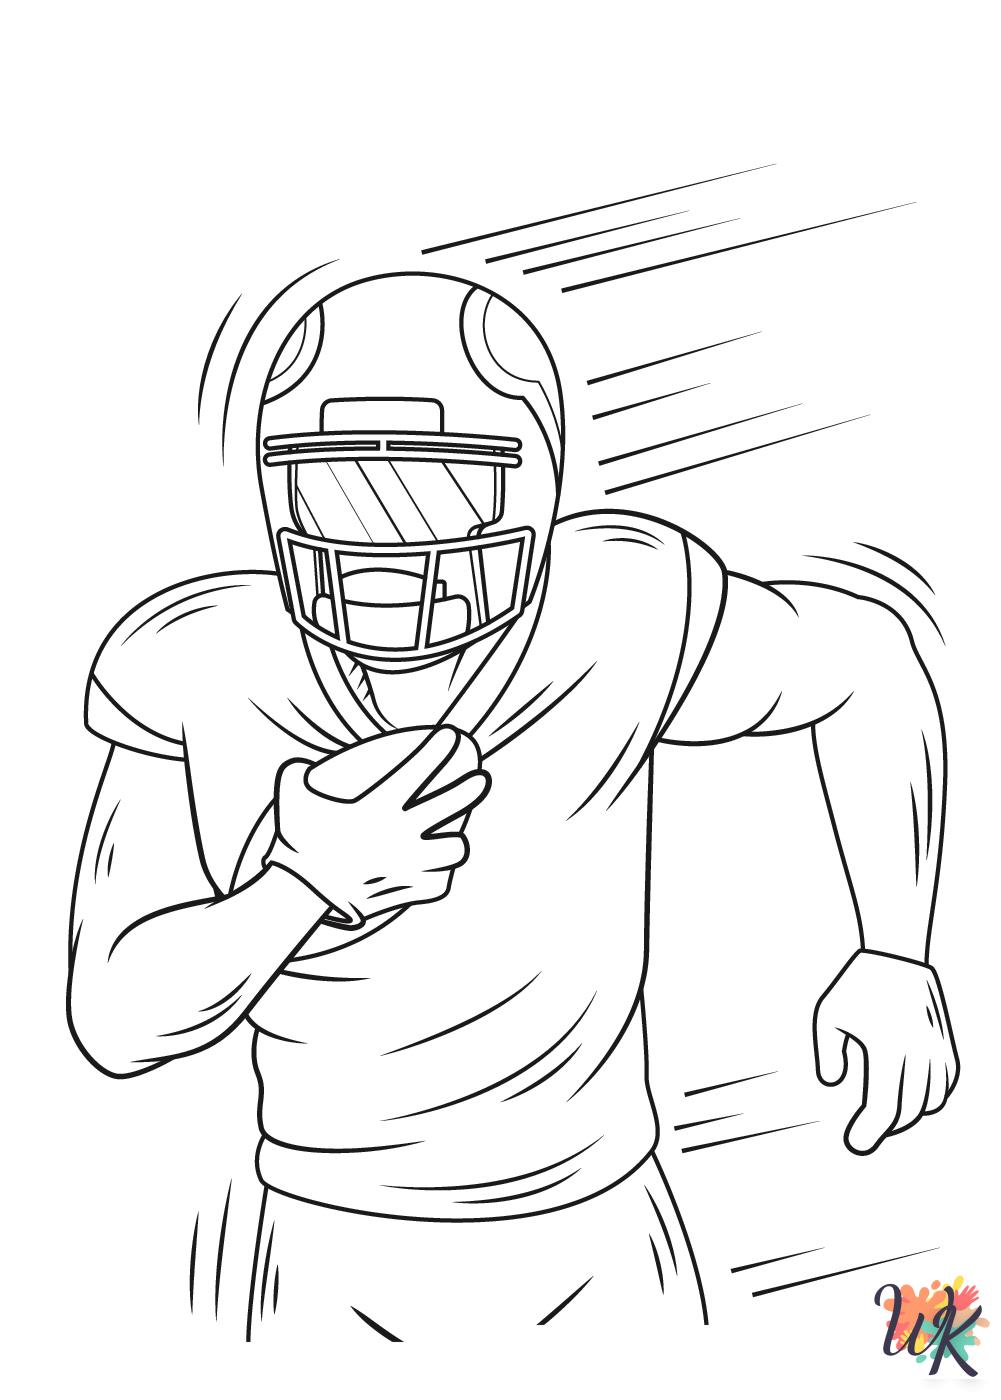 fun NFL coloring pages